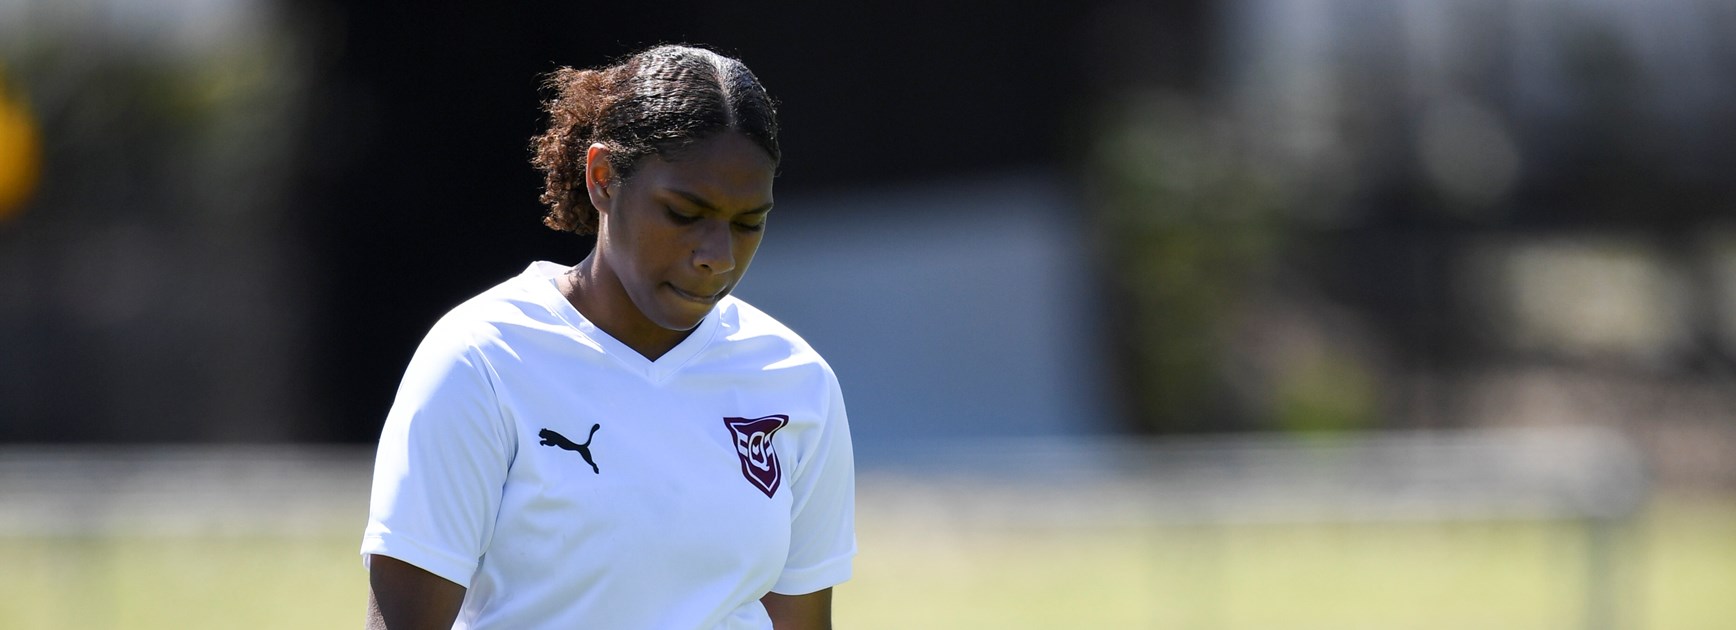 Weipa talent Rebecca Sepon looks to build team bonds